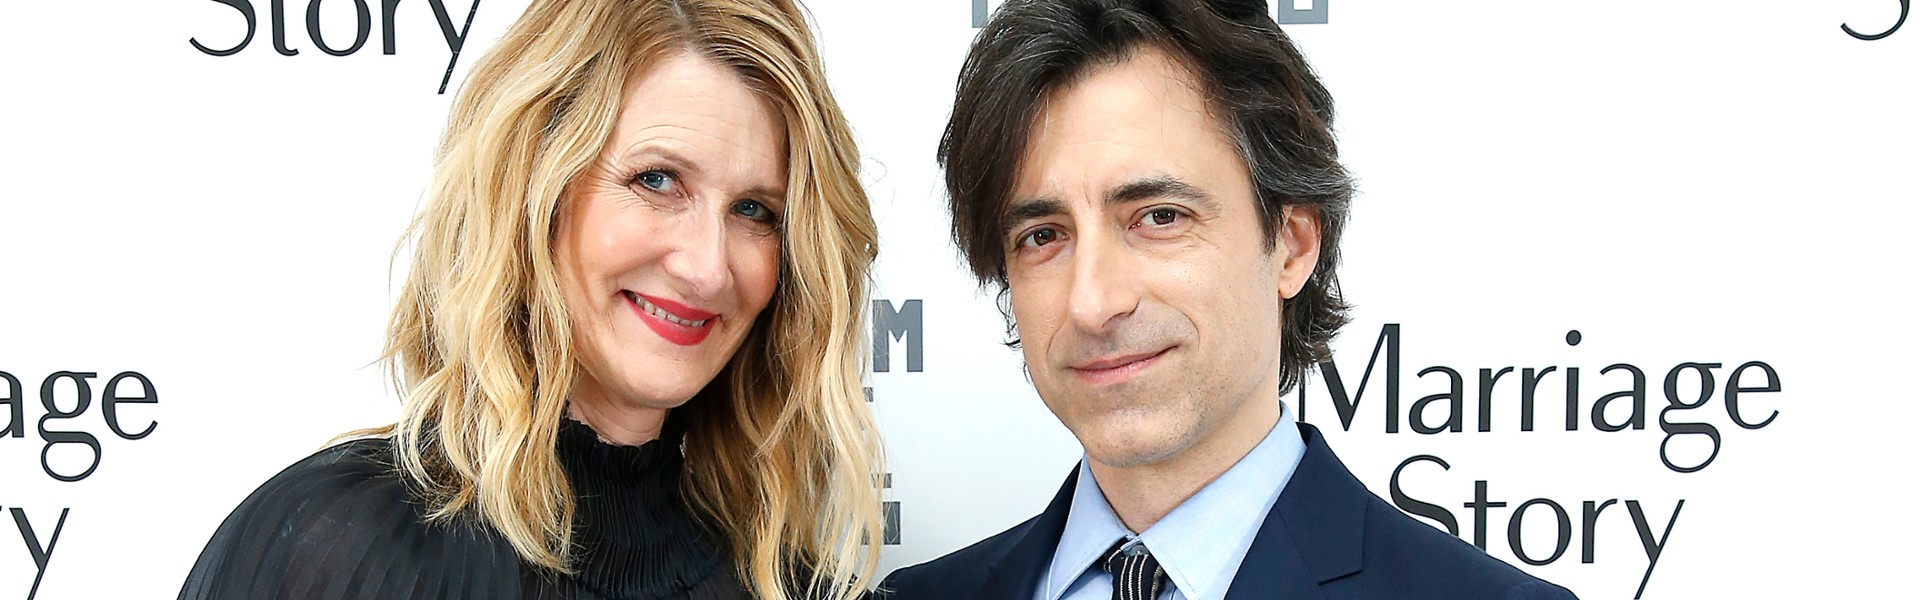 Laura Dern and other stars in Noah Baumbach’s new film. What do we know about it?